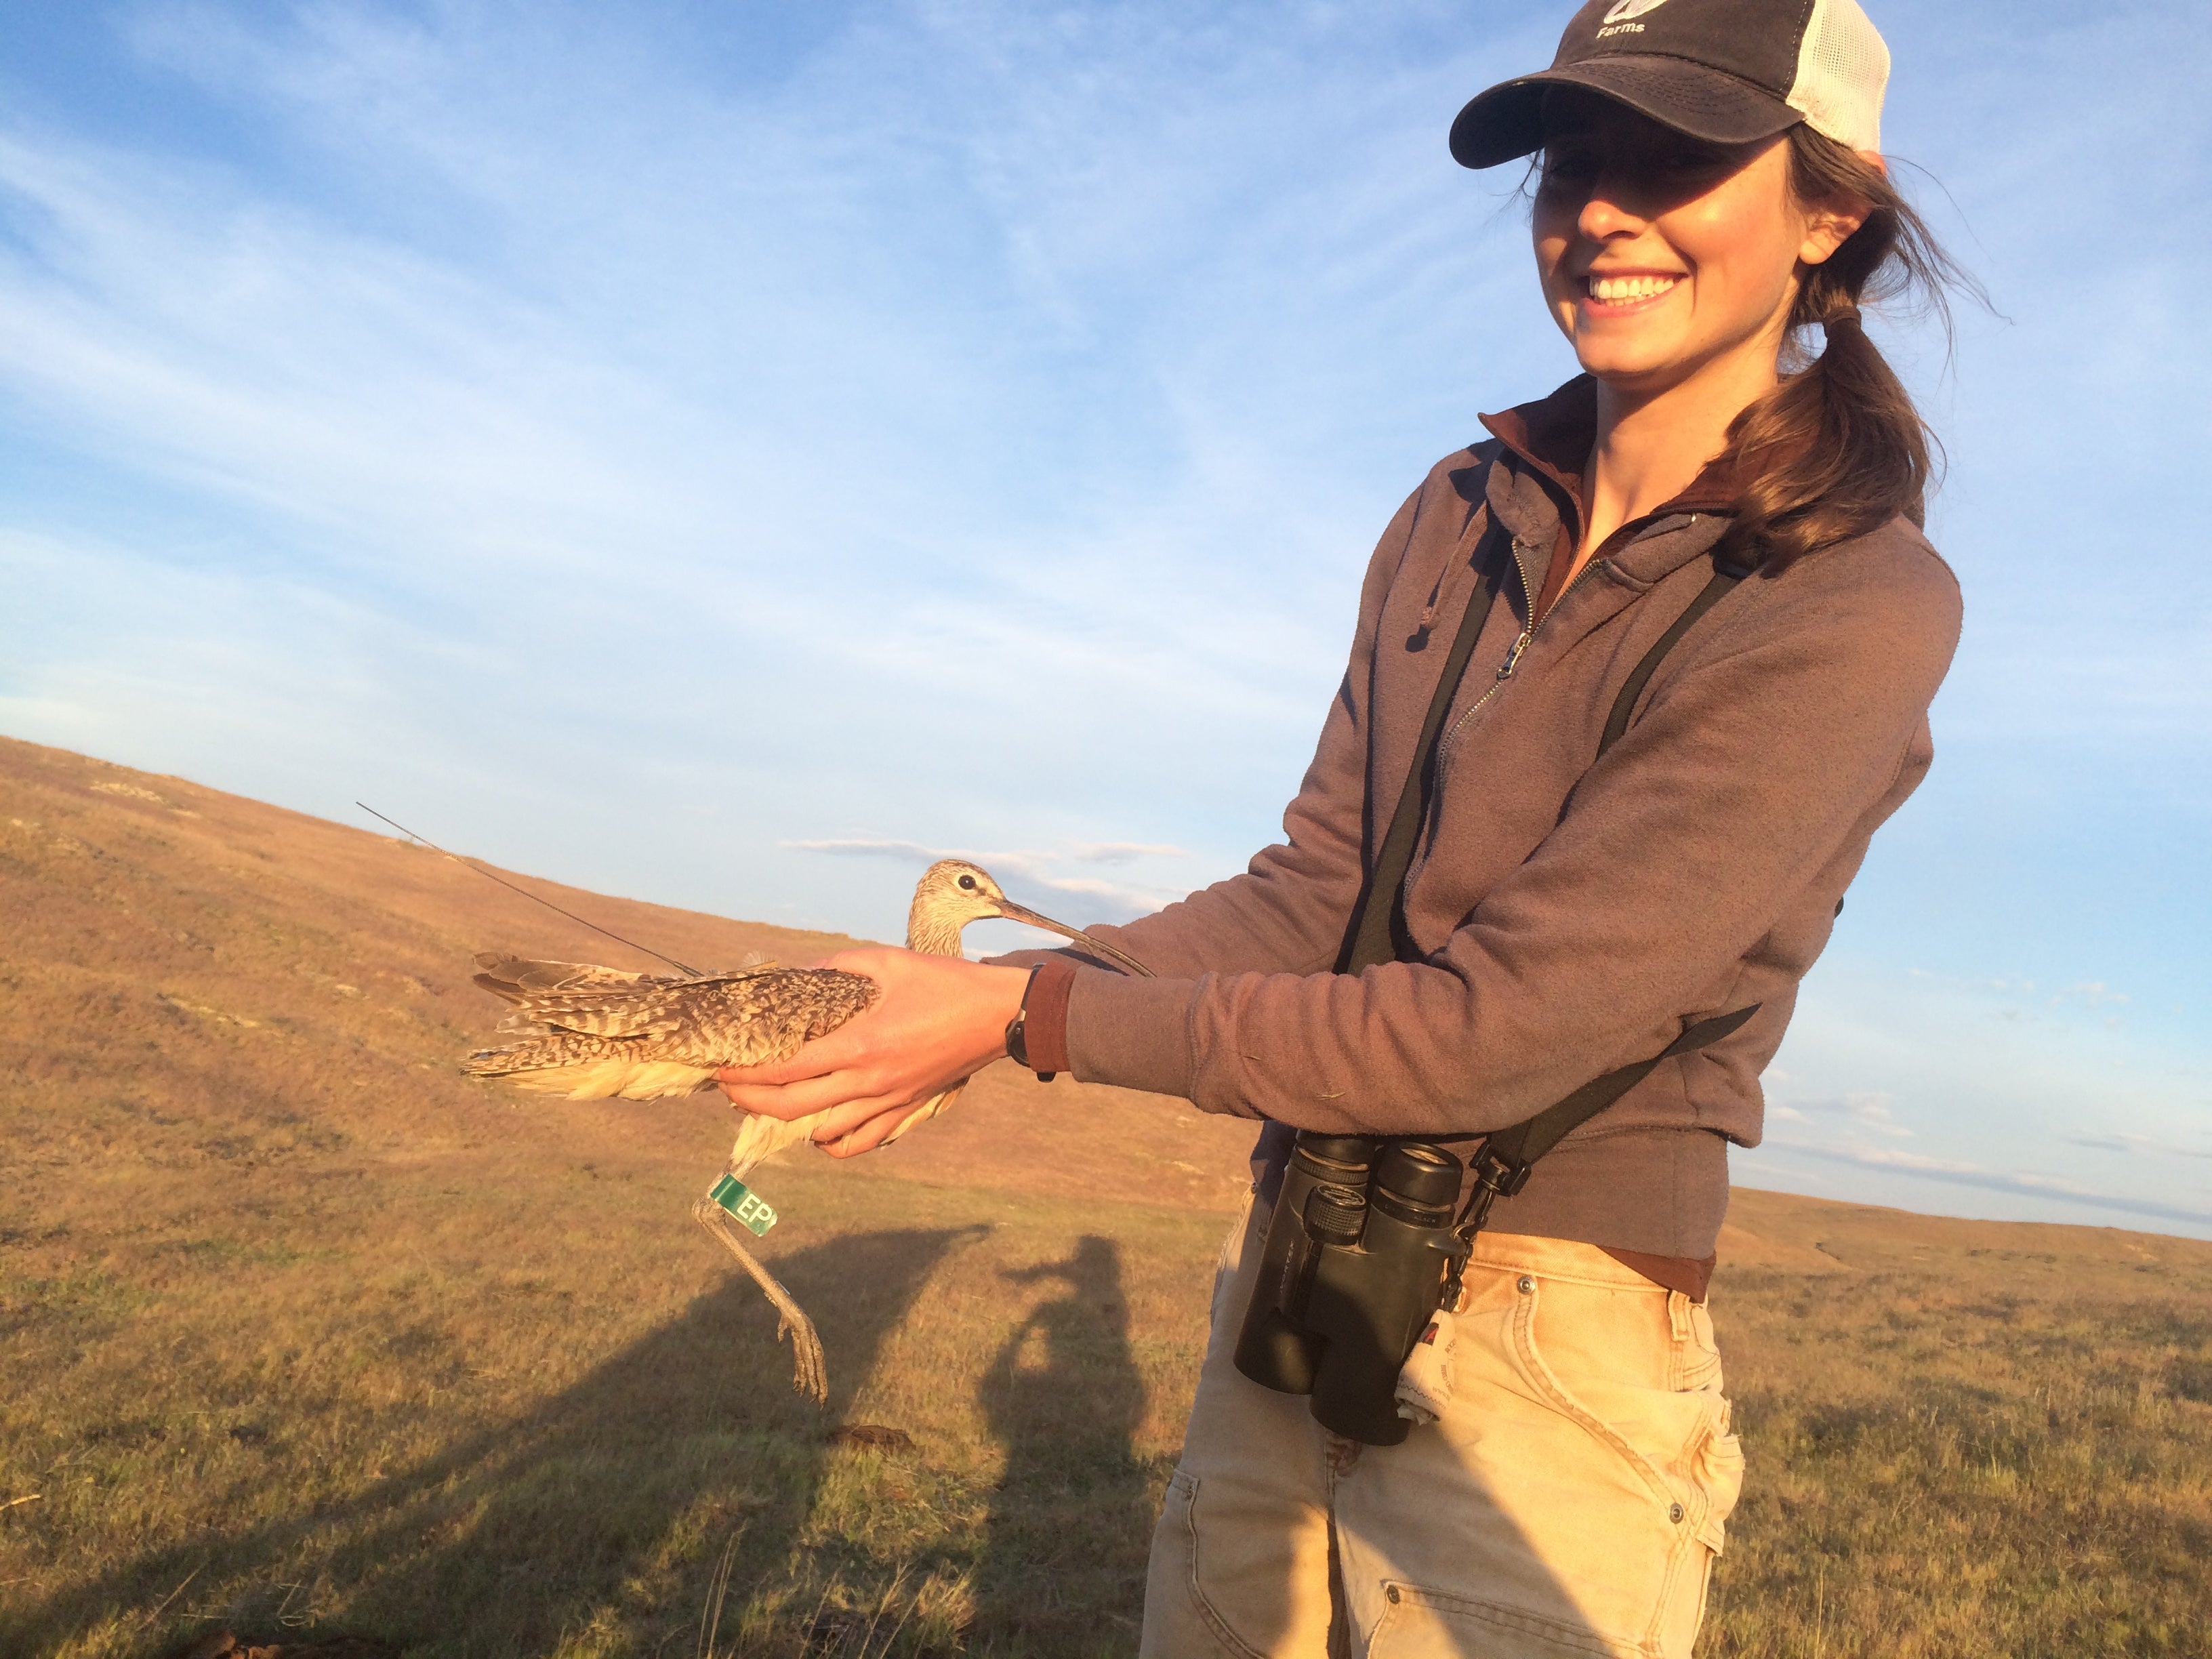 Staff profile image of Stephanie Coates holding a Long-billed Curlew